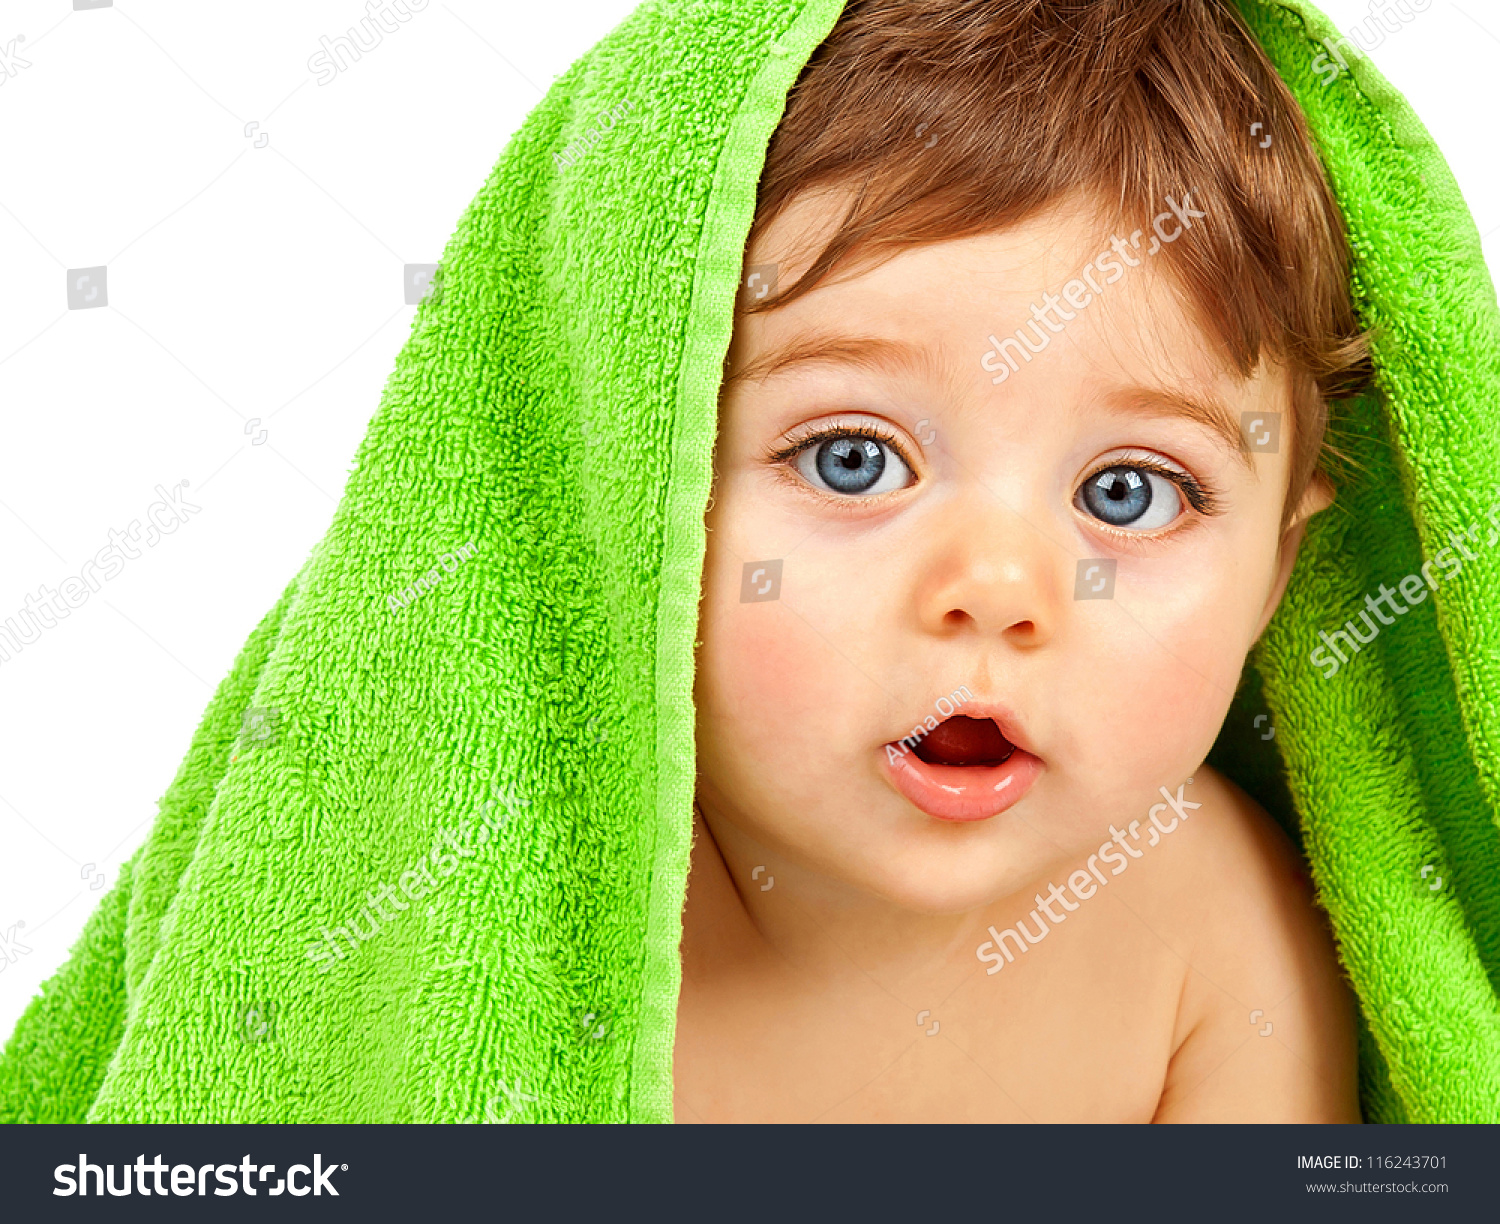 Image of cute baby boy covered with green towel isolated on white background, closeup portrait of cheerful kid with blue eyes, health care, pretty infant after bath, happy childhood, child's hygiene #116243701